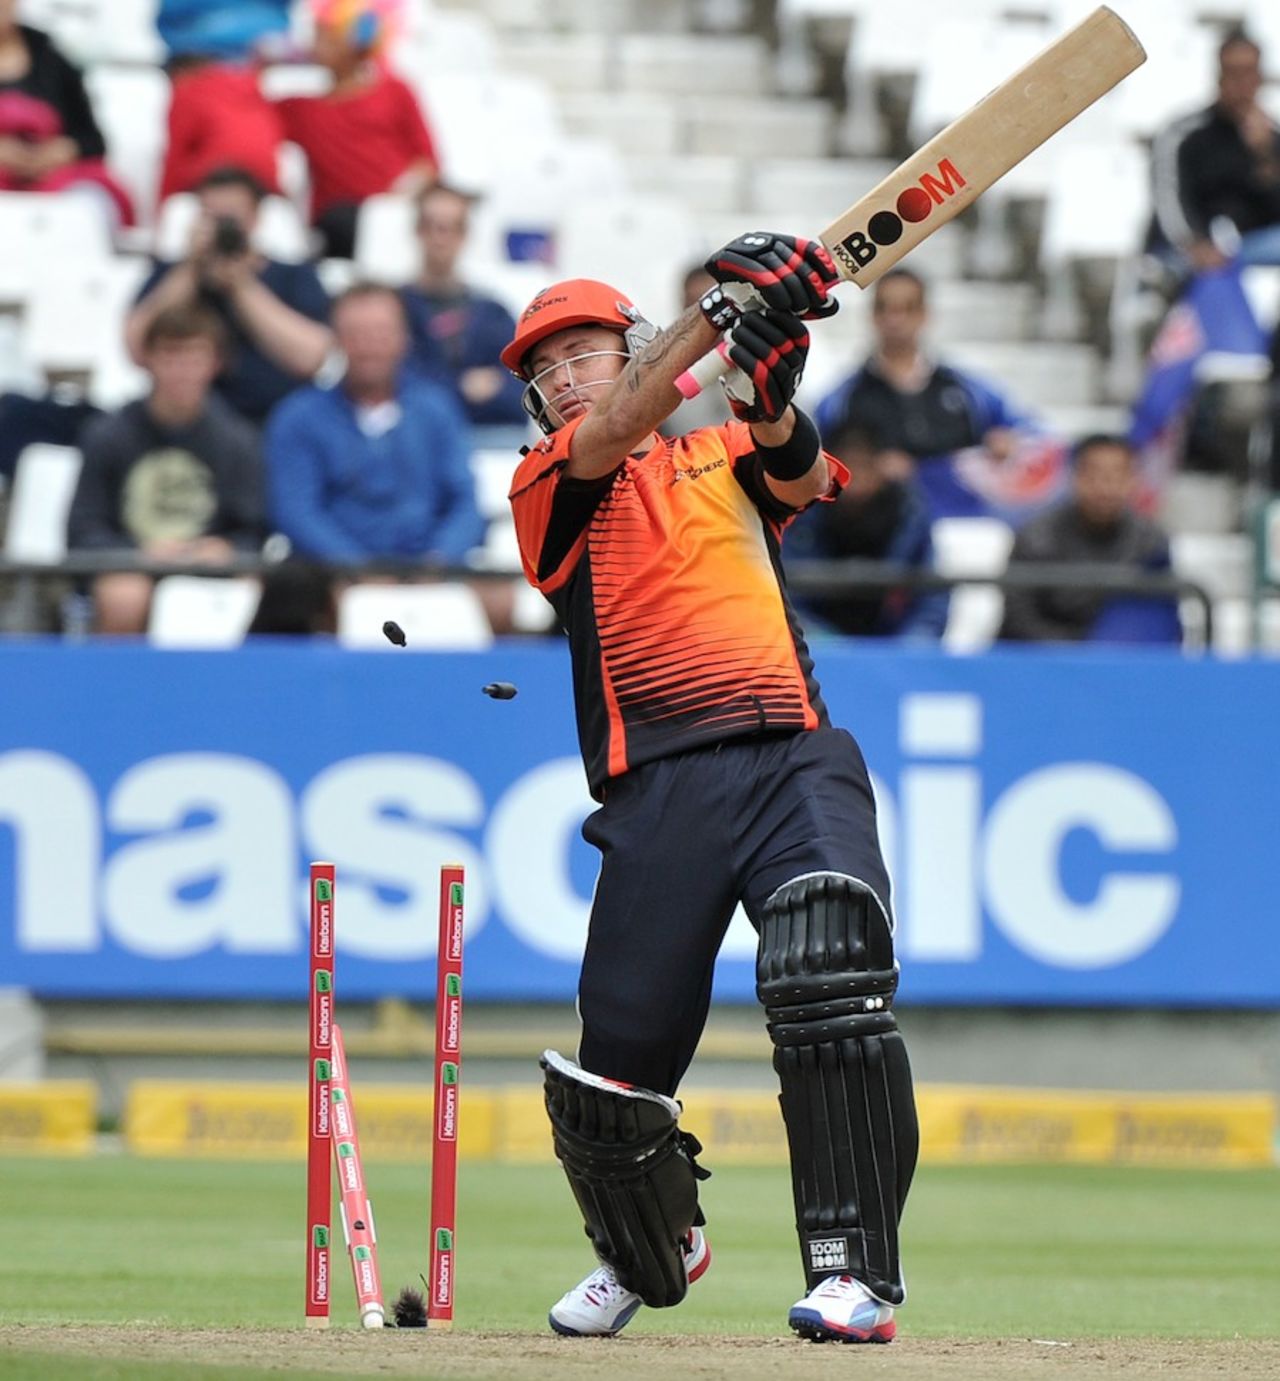 Herschelle Gibbs was bowled for 6 by Morne Morkel, Delhi Daredevils v Perth Scorchers, Champions League T20, Cape Town, October 21, 2012